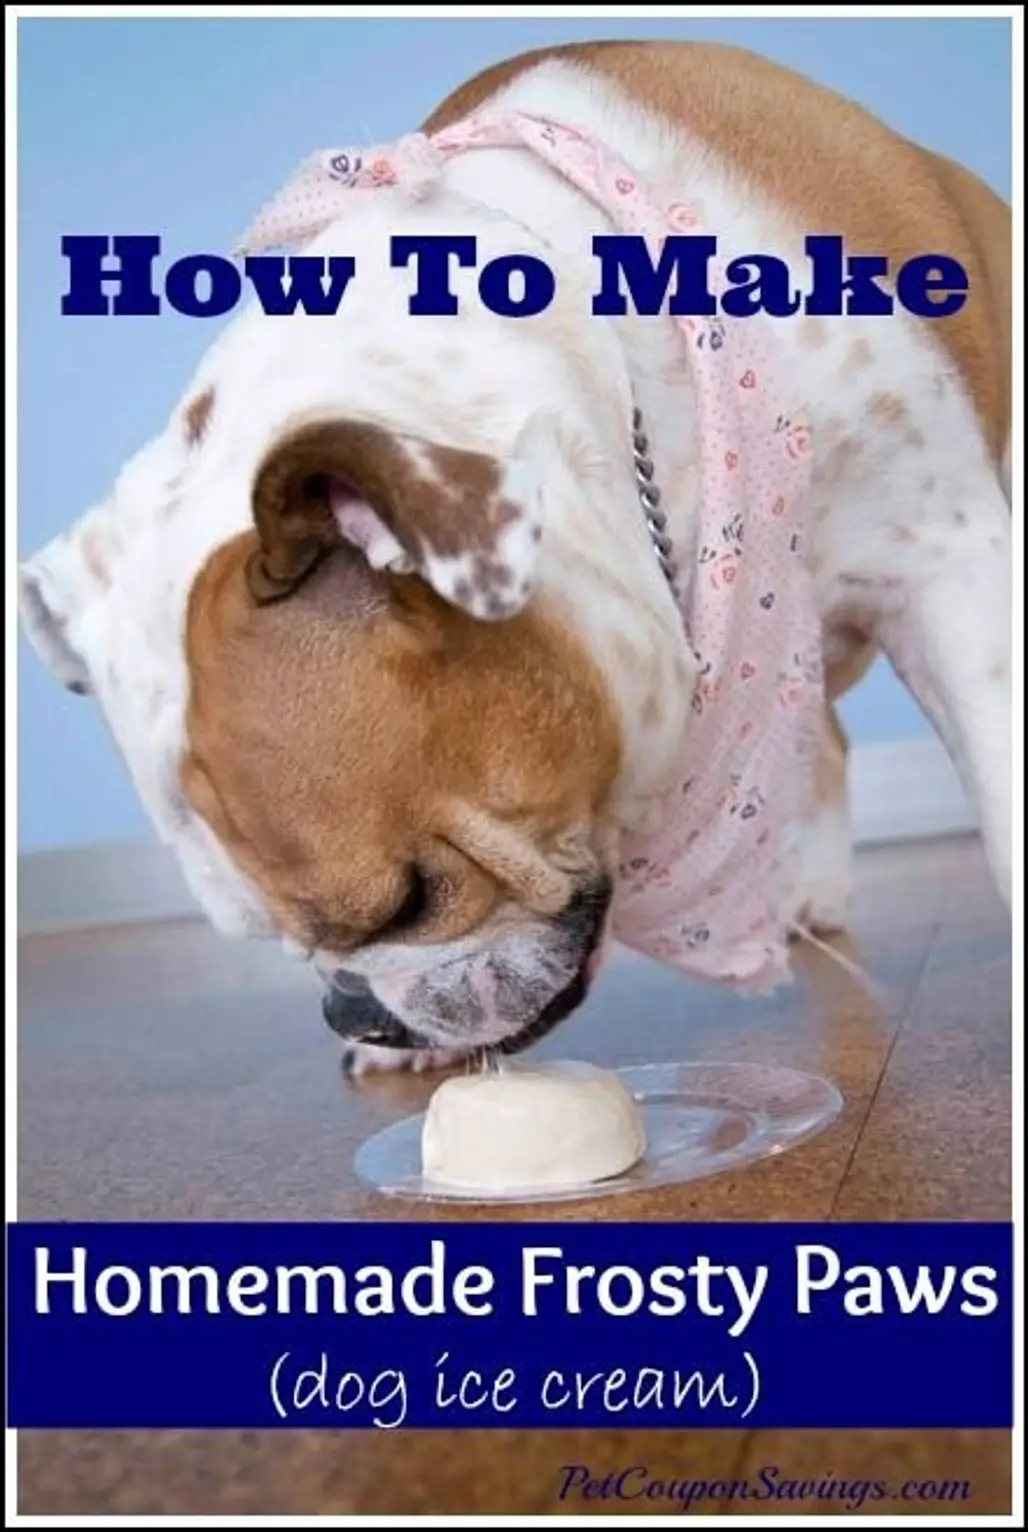 Make Homemade Frosty Paws